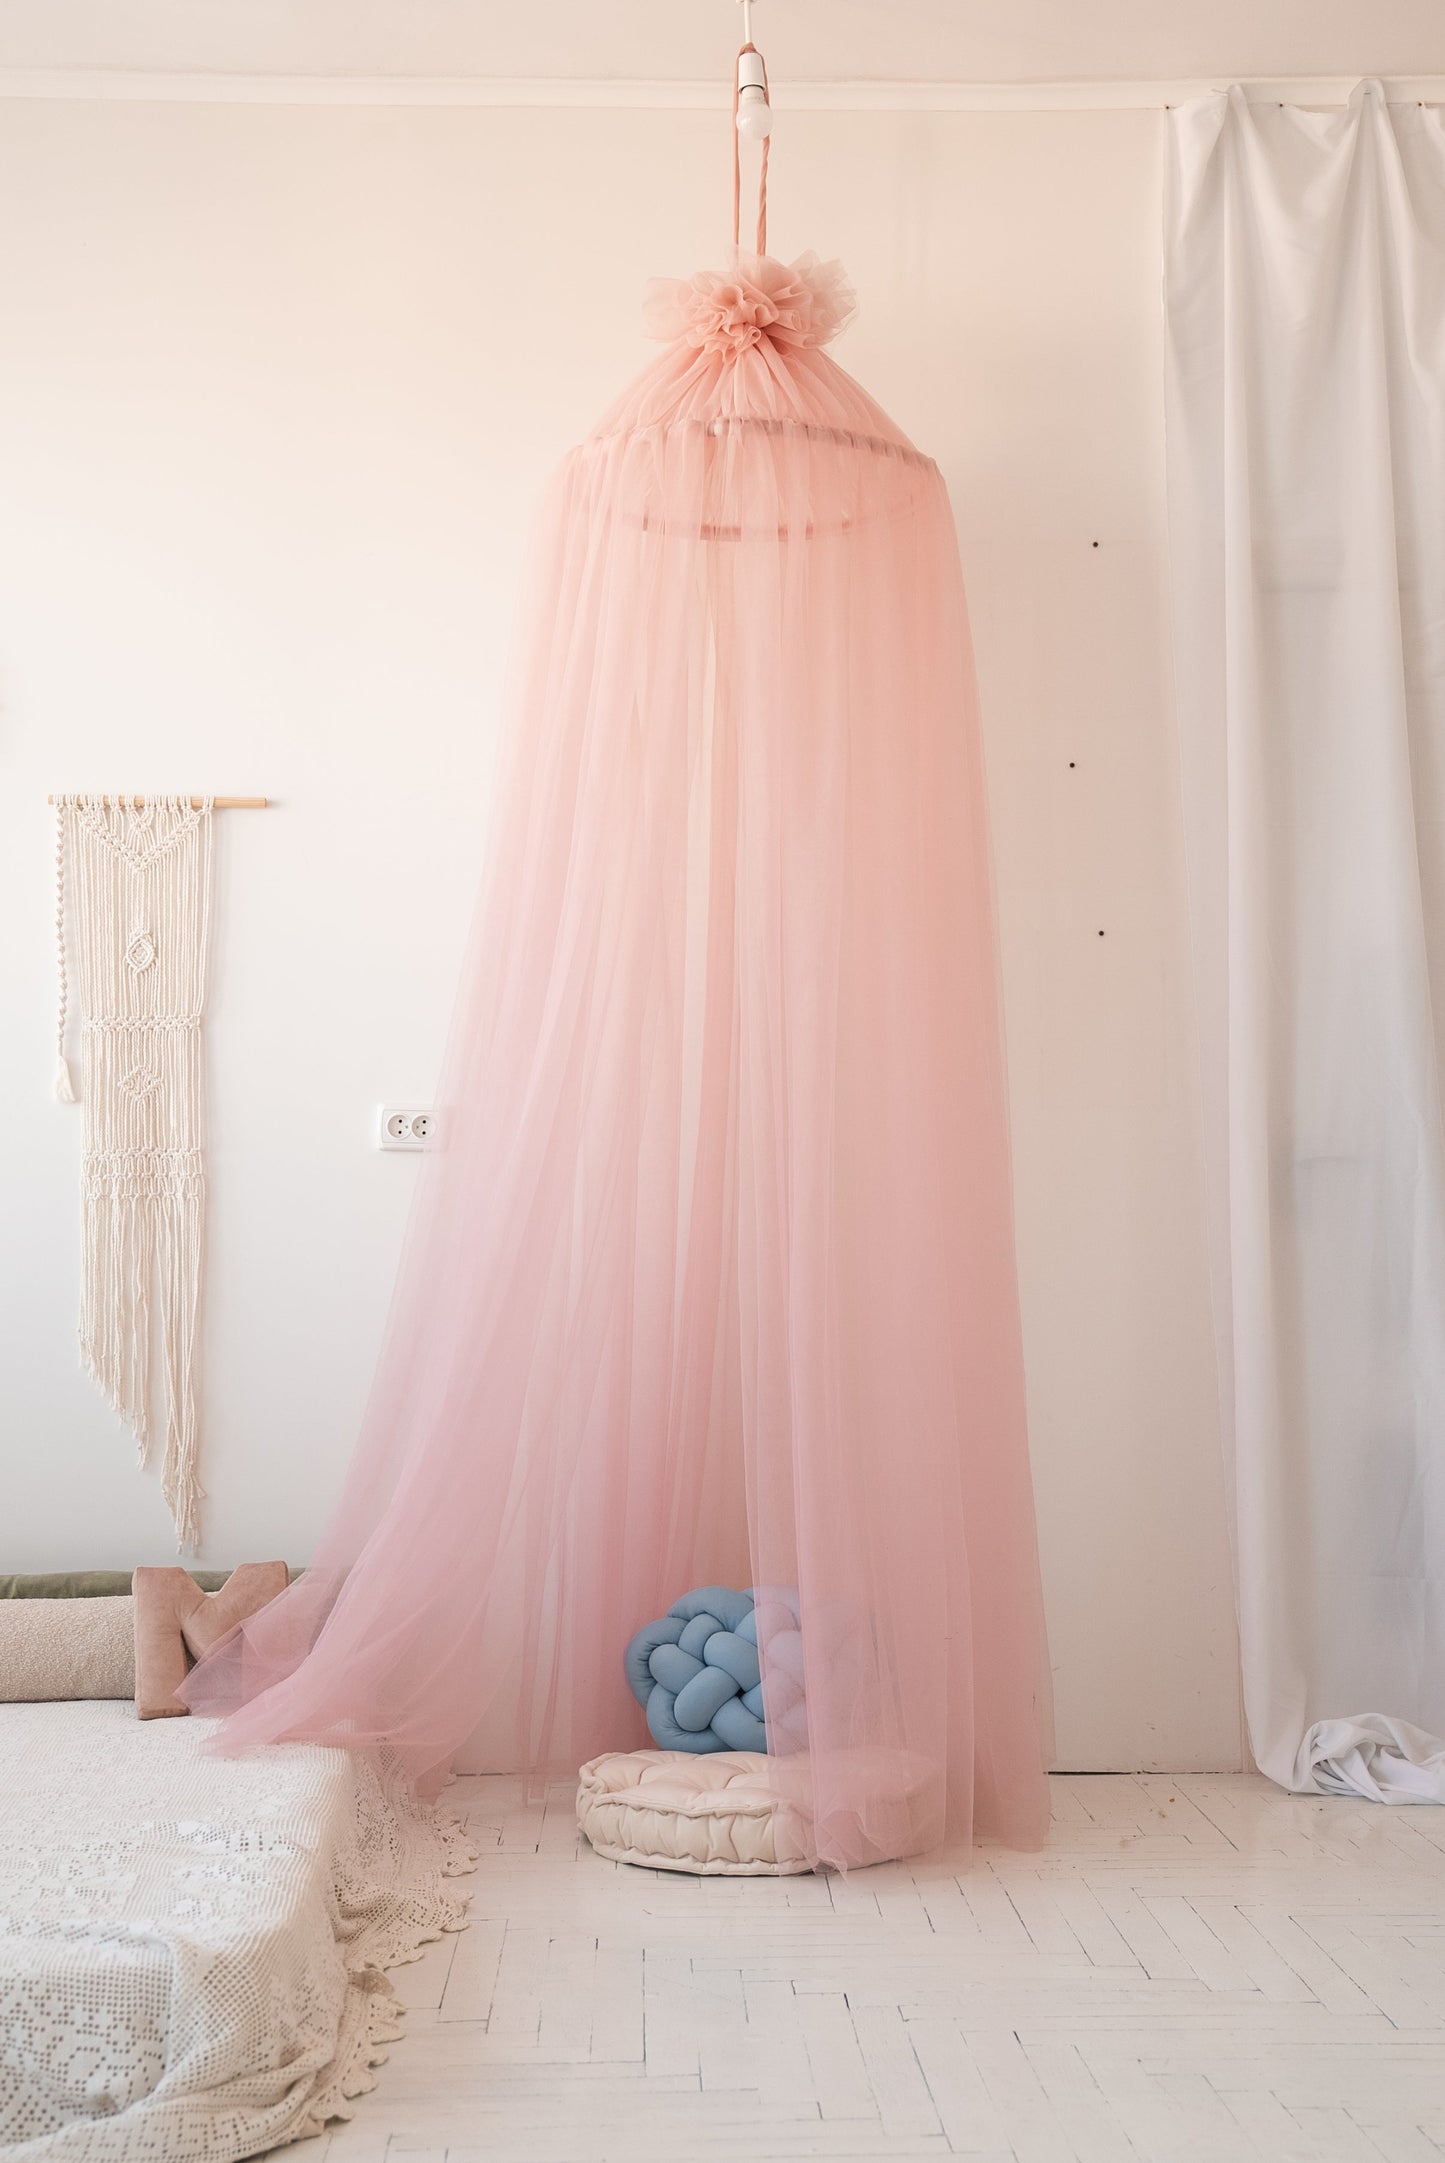 Tulle Canopy